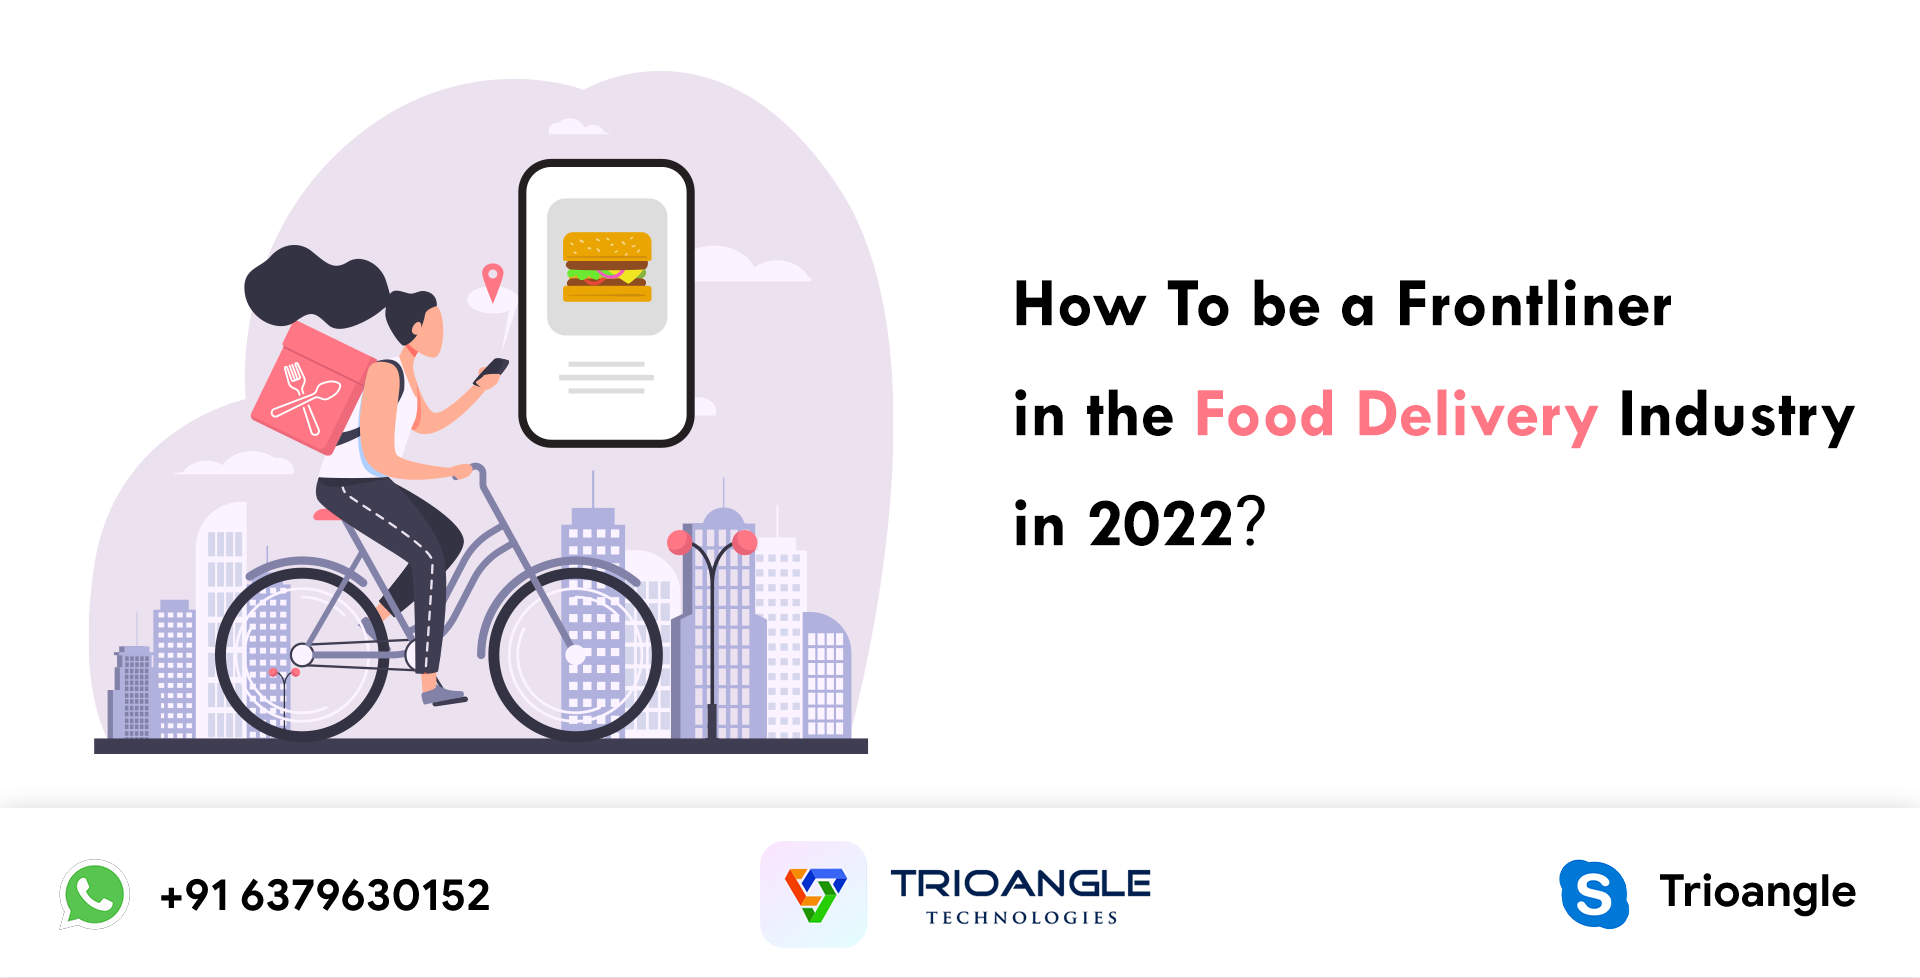 How To be a Frontliner in the Food Delivery Industry in 2022?